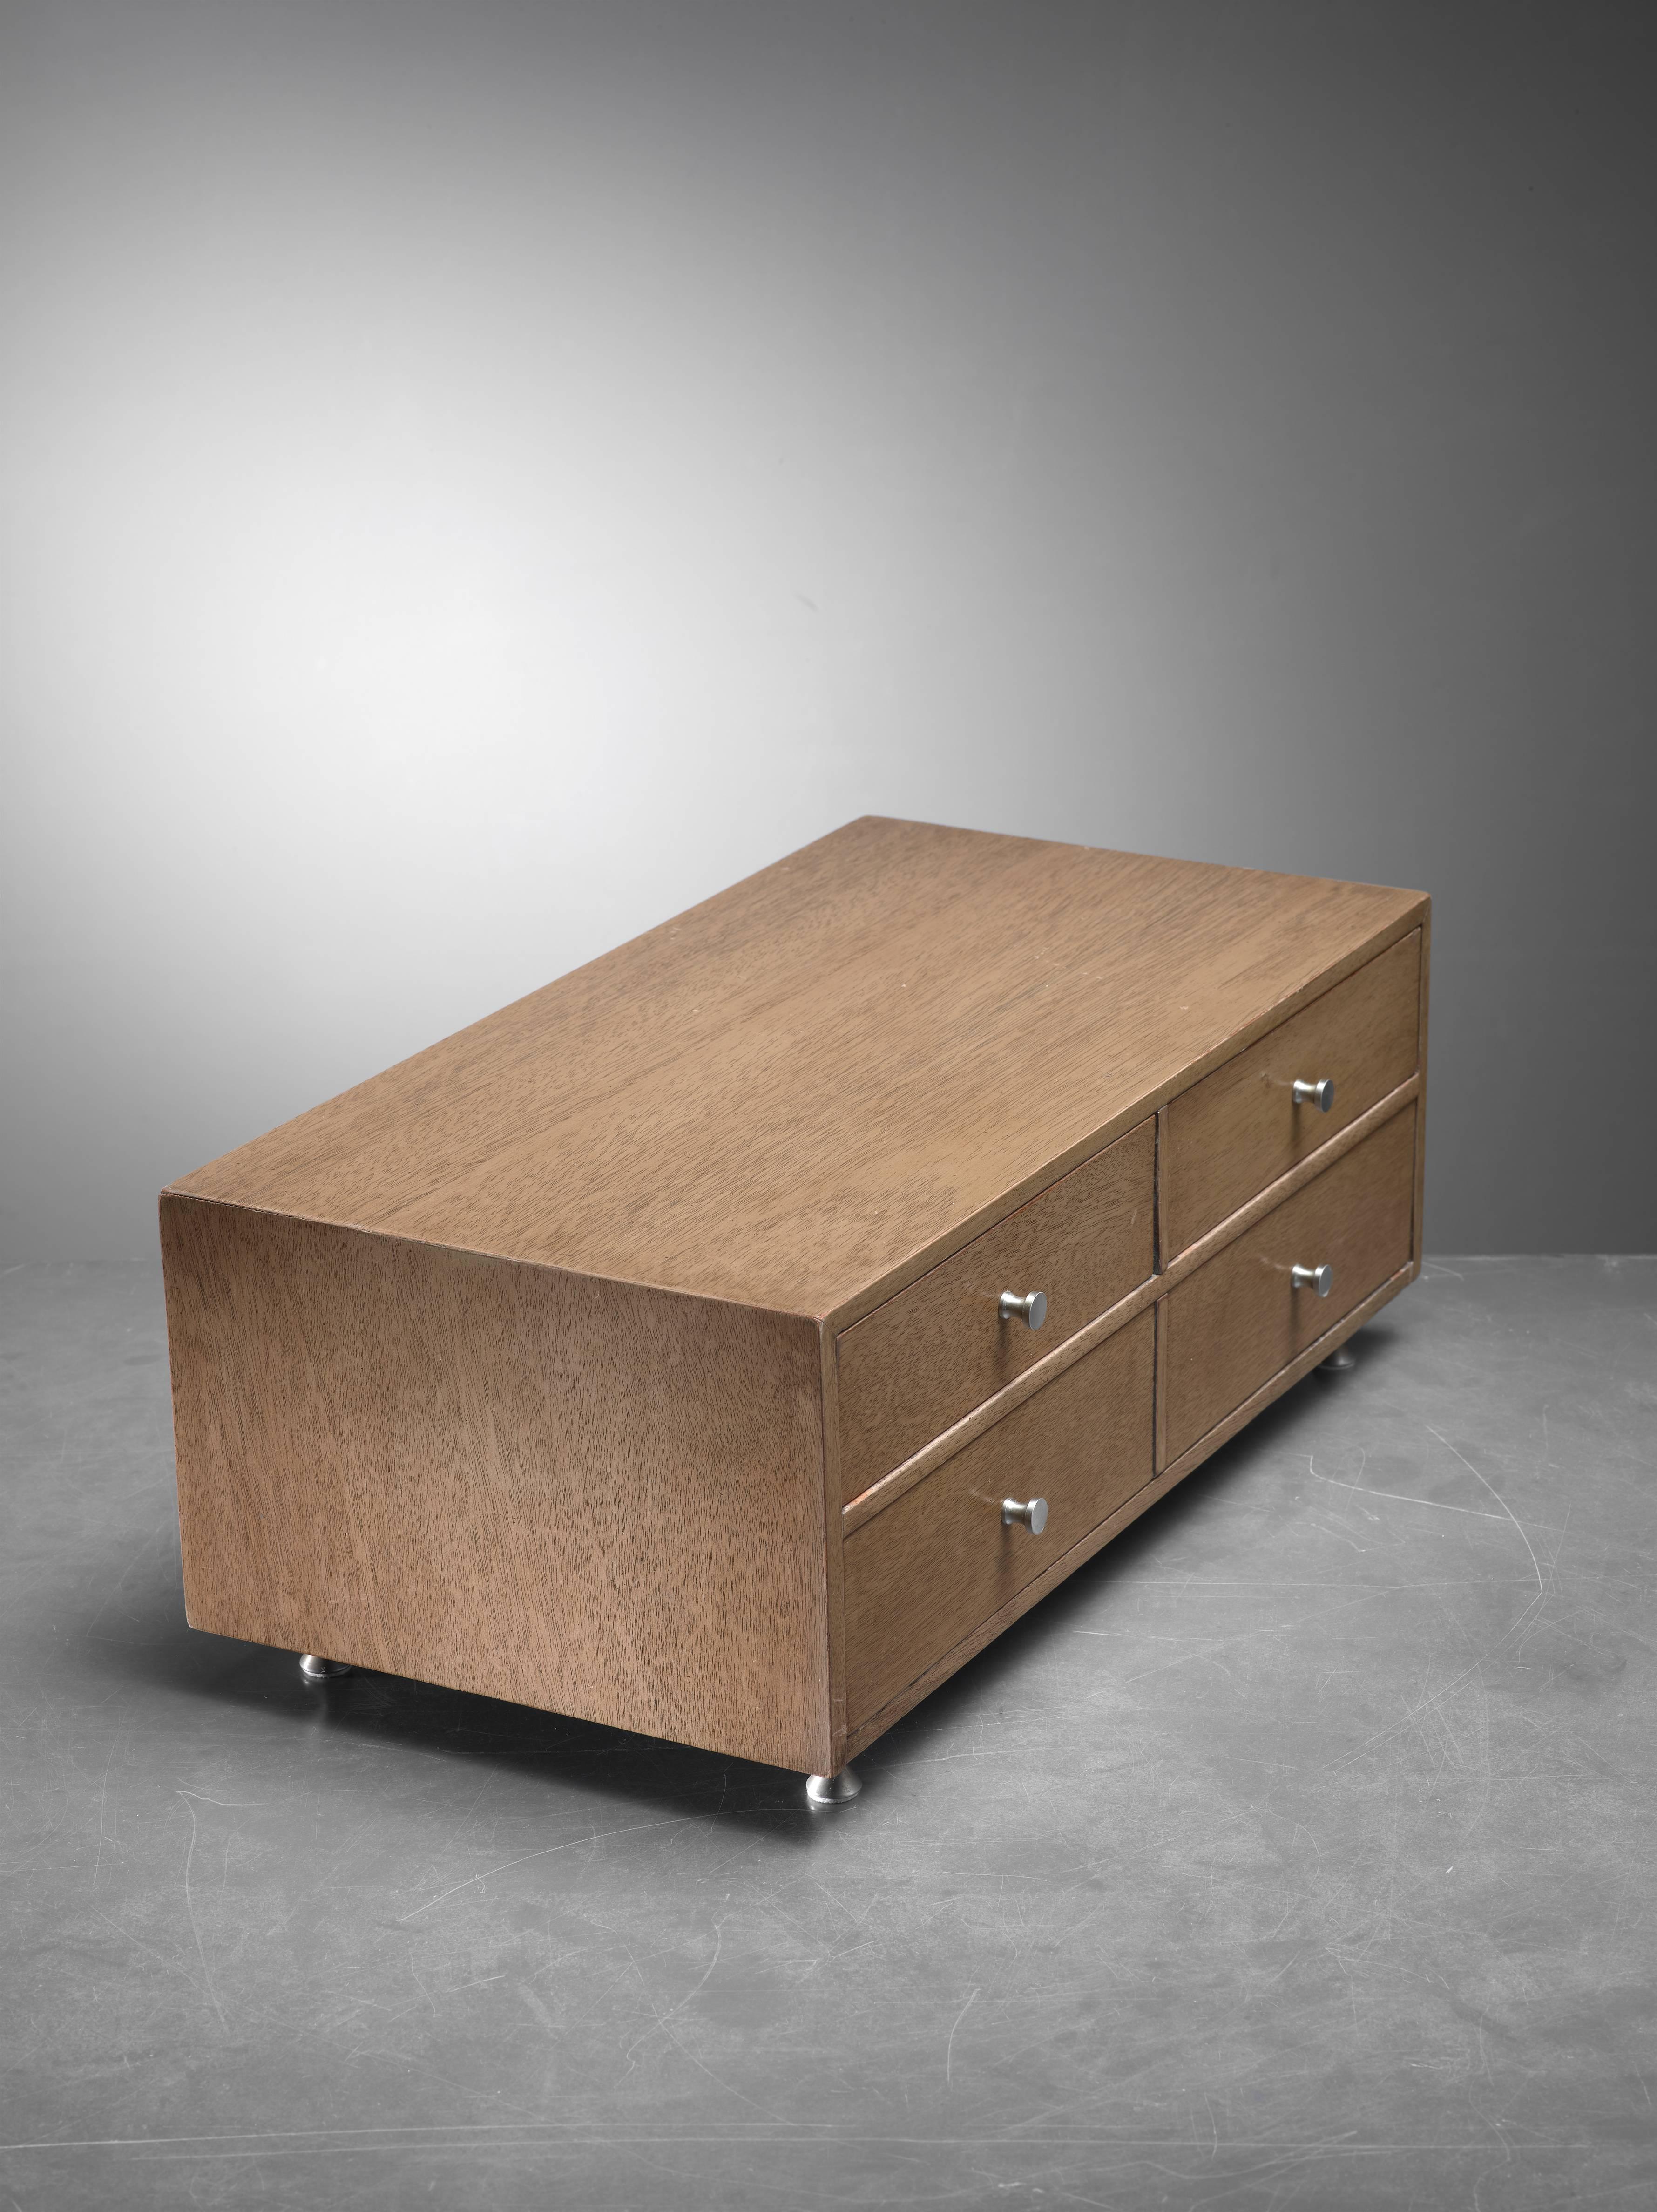 A beautiful midcentury wooden jewelry chest with aluminum pulls, by Arthur Umanoff. Possibly for the Elton Furniture Company. The chest holds four drawers and is in an excellent condition.